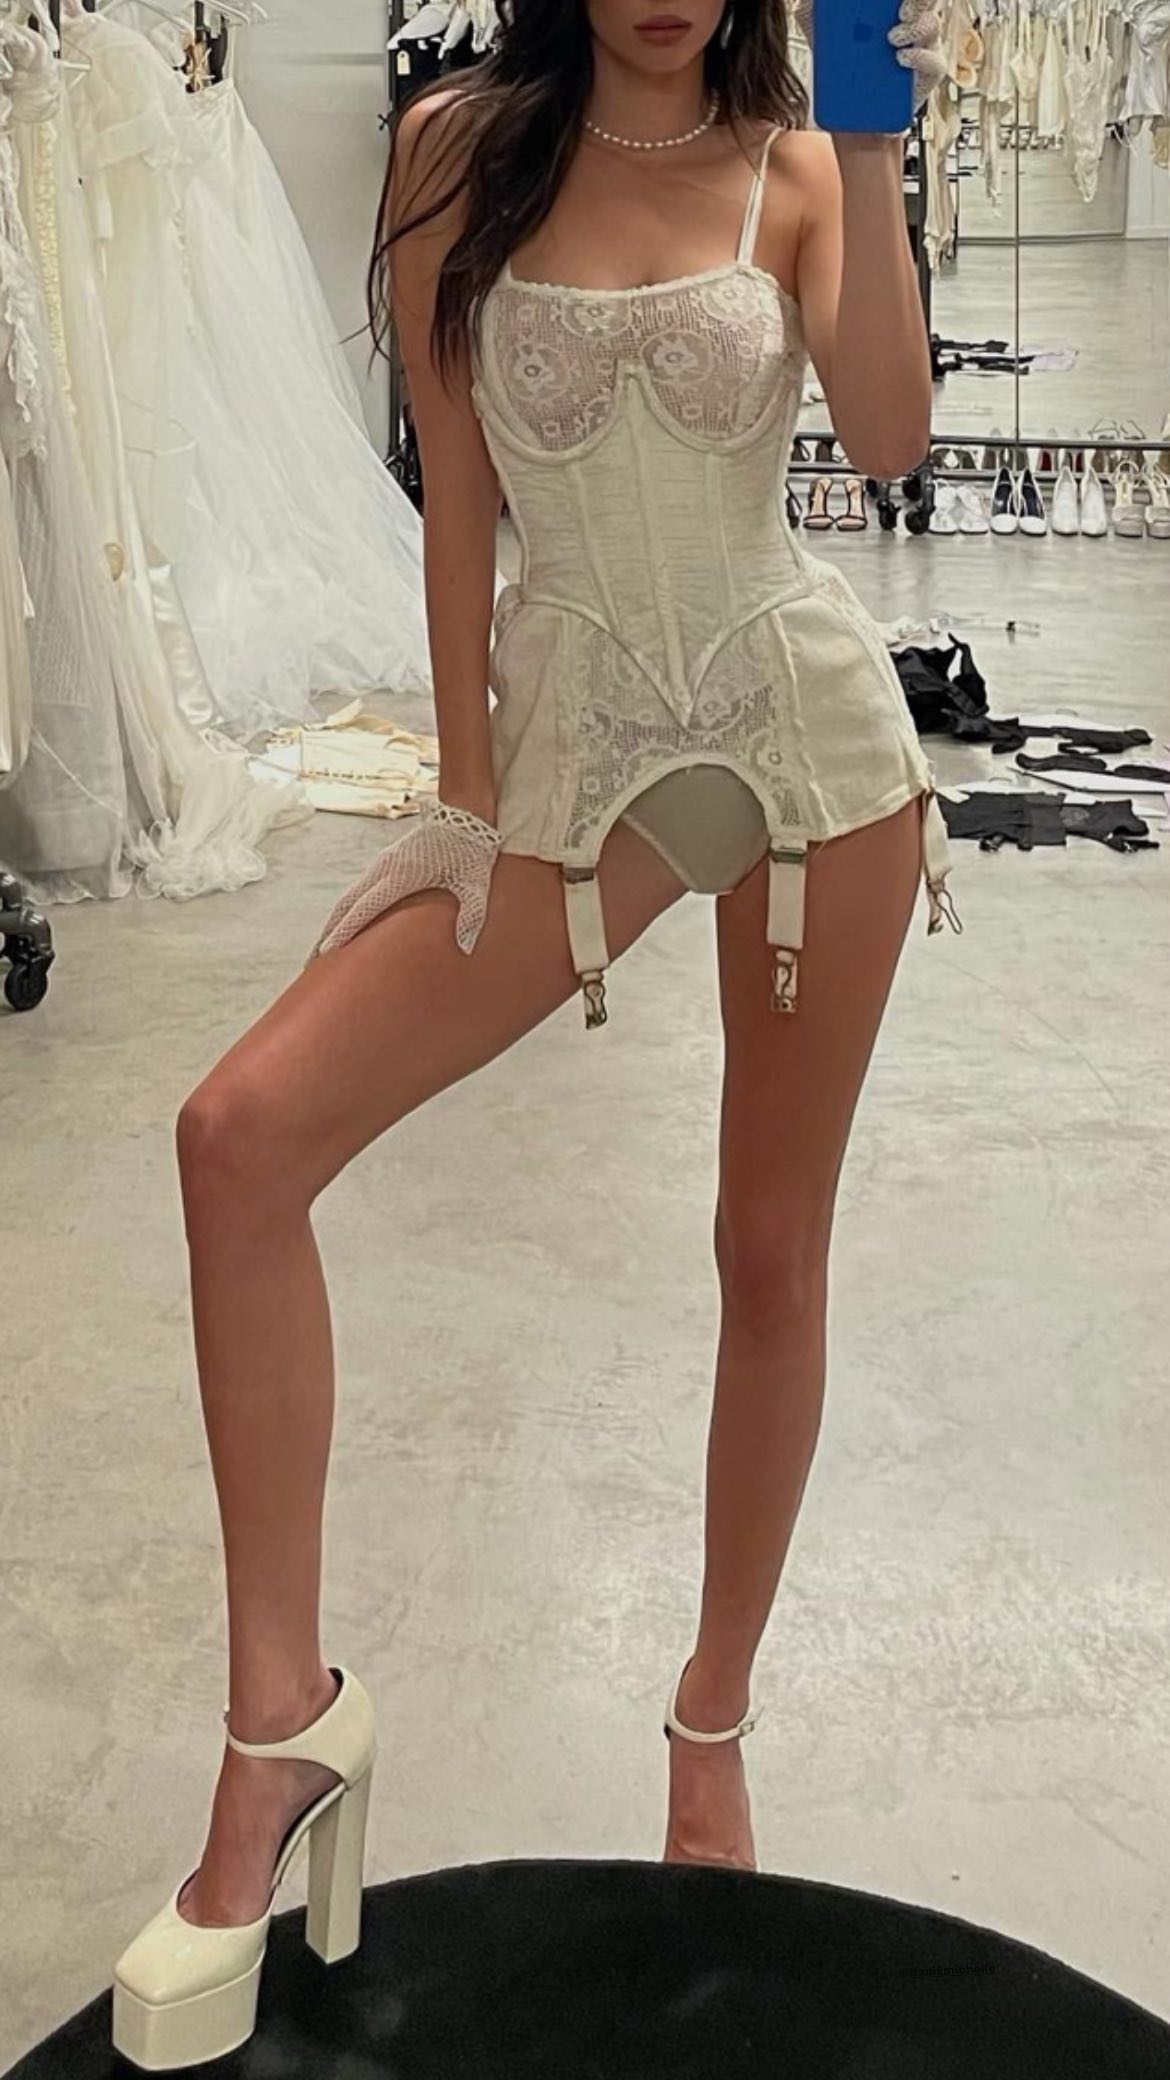 Kendall Jenner Poses in Her Bra and Panties! - Photo 45